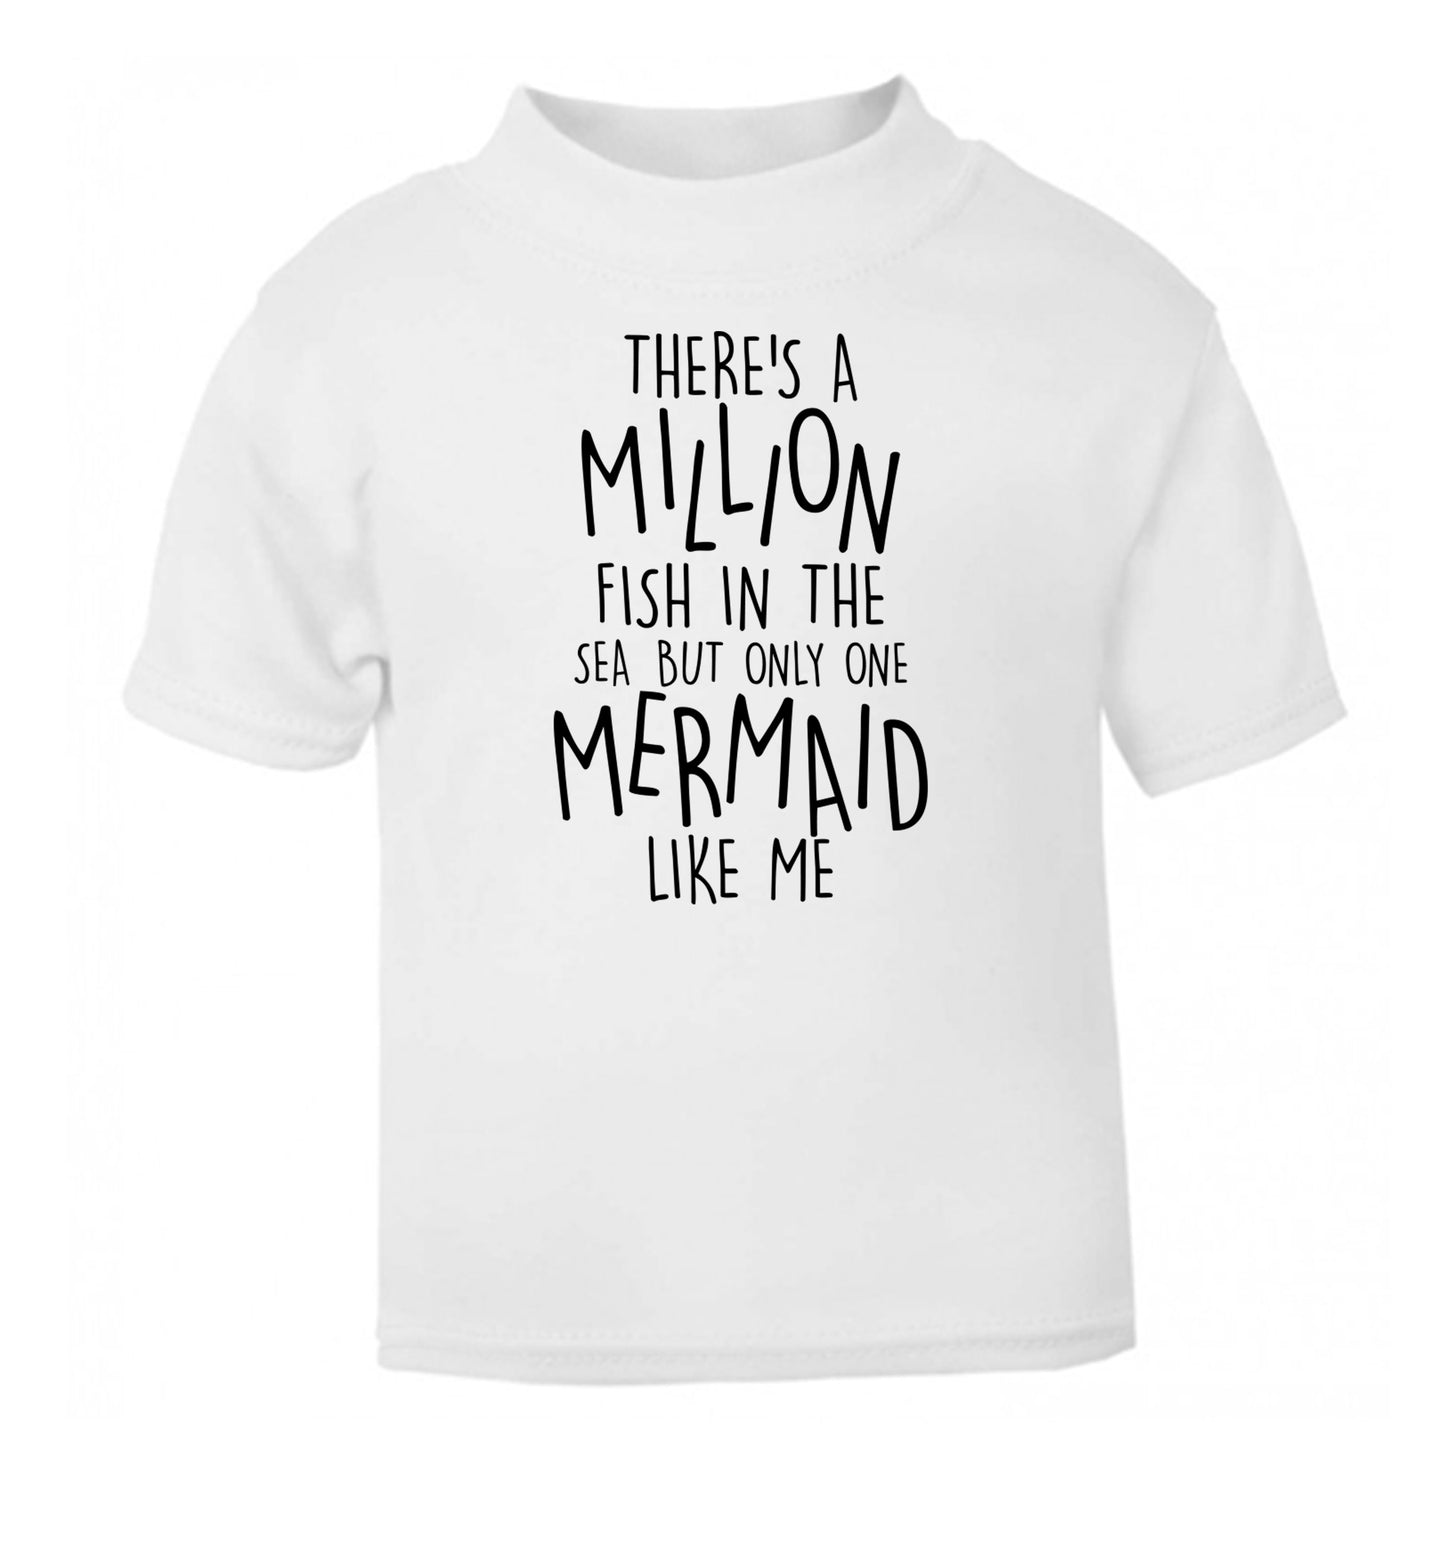 There's a million fish in the sea but only one mermaid like me white Baby Toddler Tshirt 2 Years